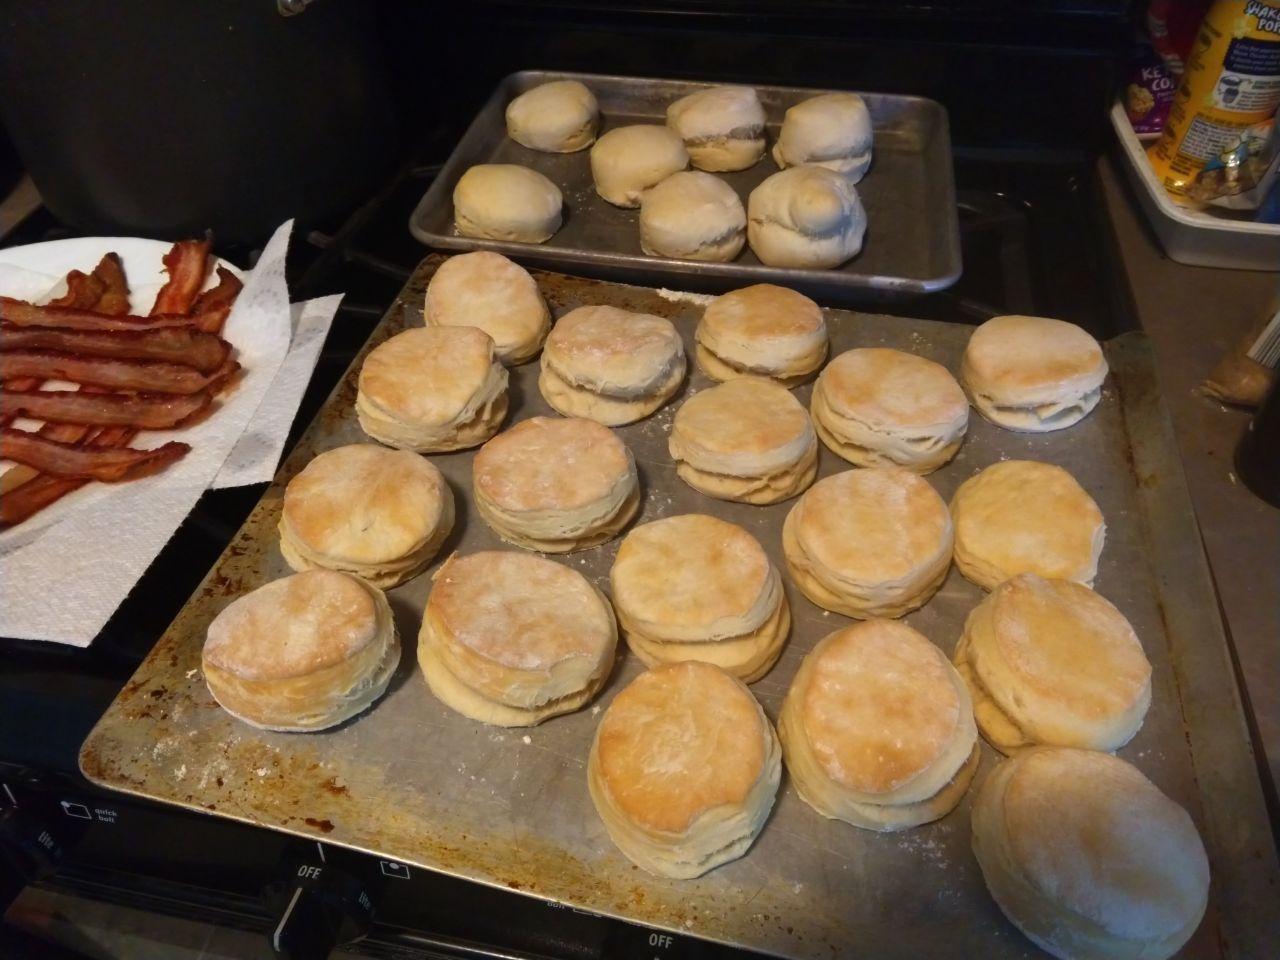 Pan of biscuits out of the oven next to a plate of bacon.